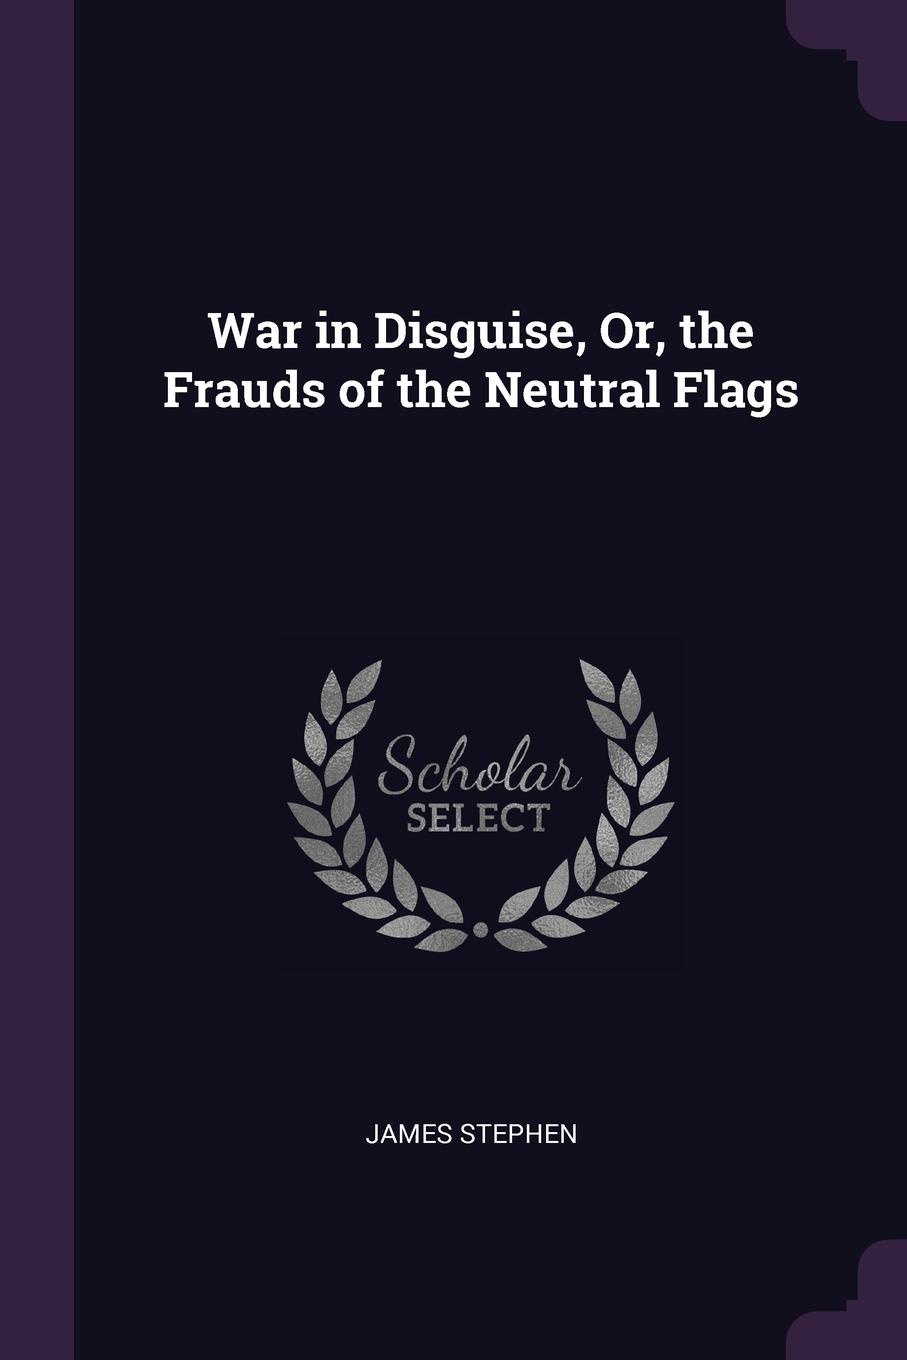 War in Disguise, Or, the Frauds of the Neutral Flags